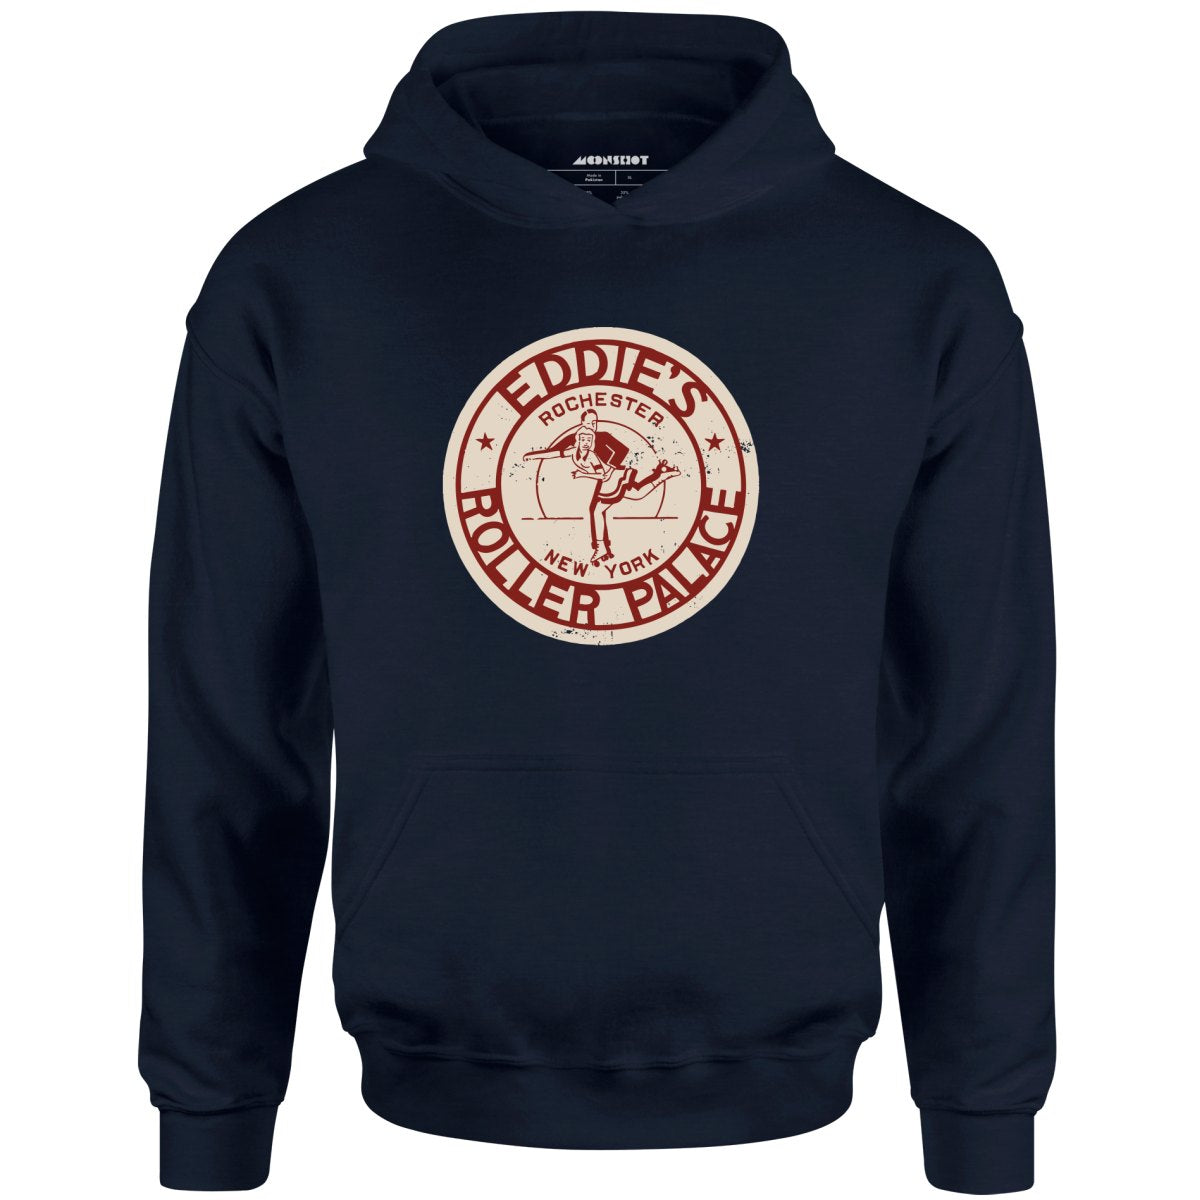 Eddie's Roller Palace - Rochester, NY - Vintage Roller Rink - Unisex Hoodie